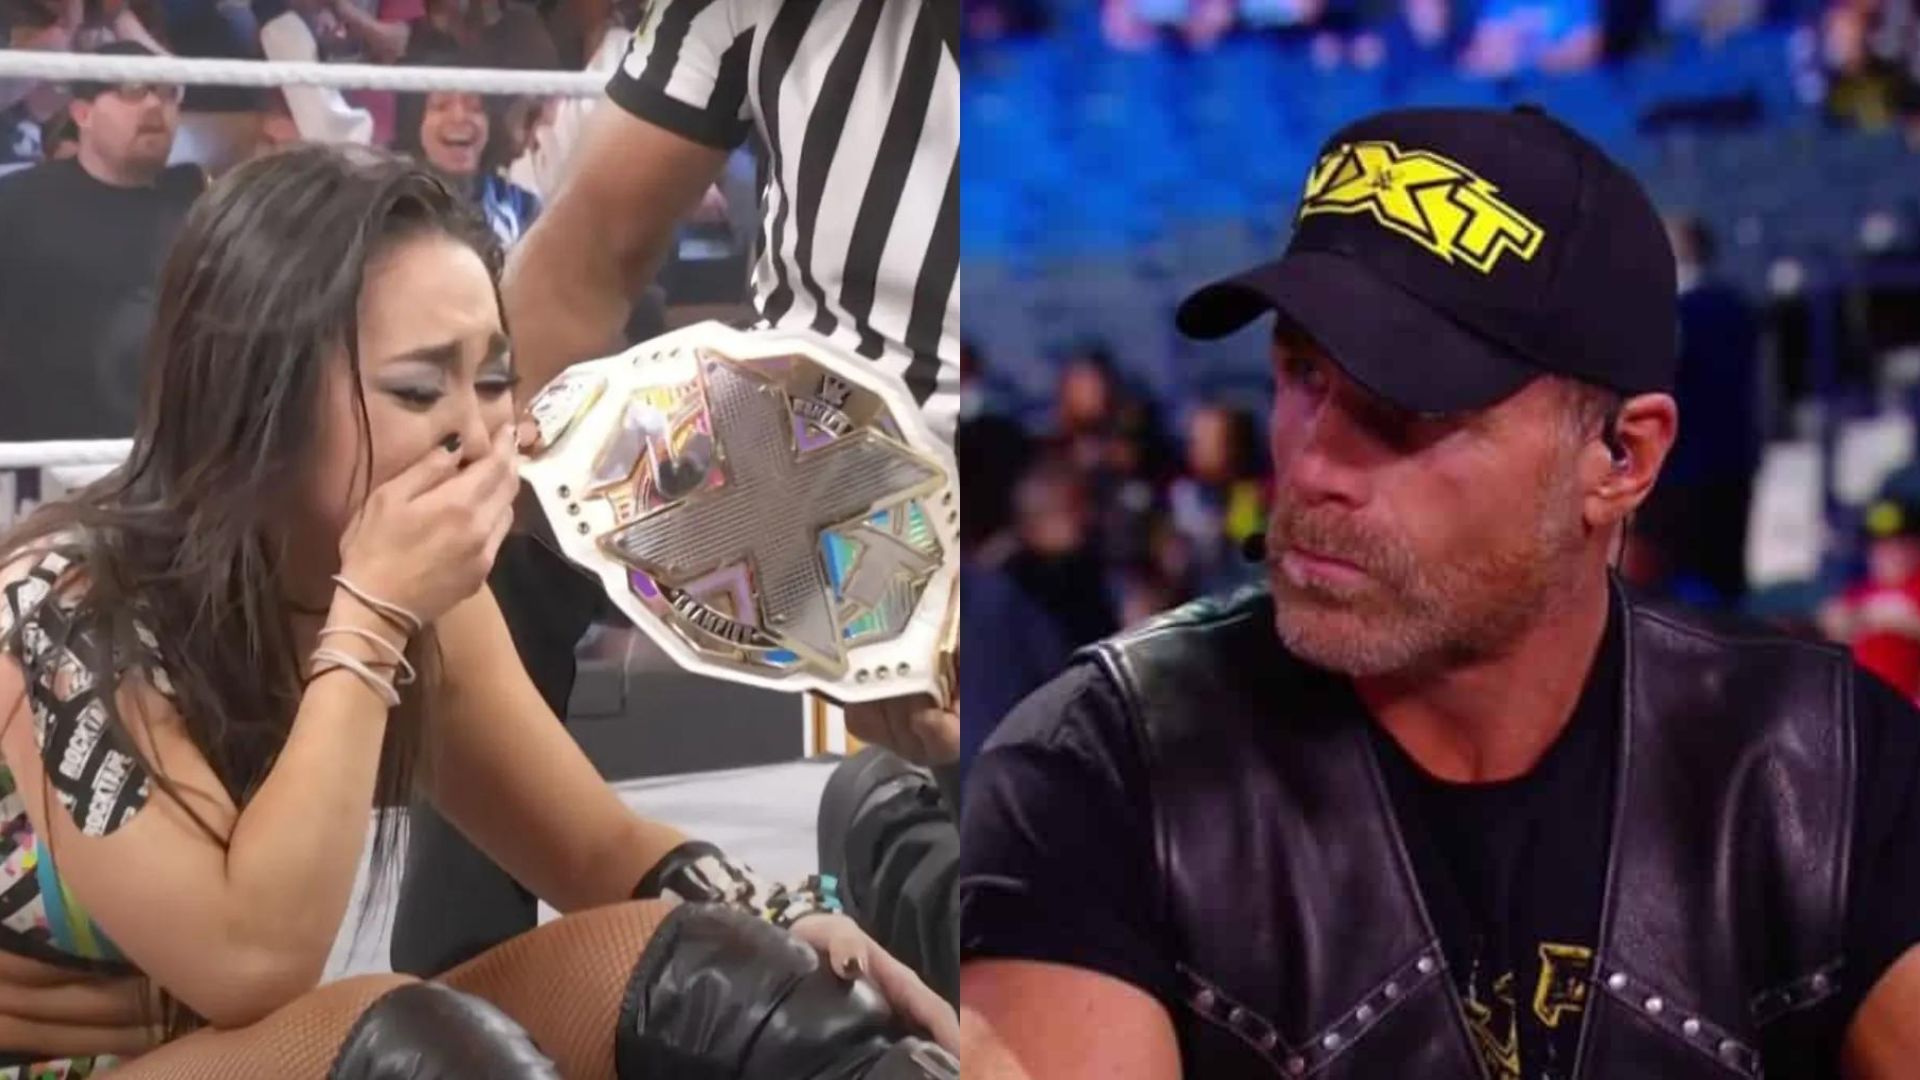 Roxanne Perez was embraced by Shawn Michaels after her win